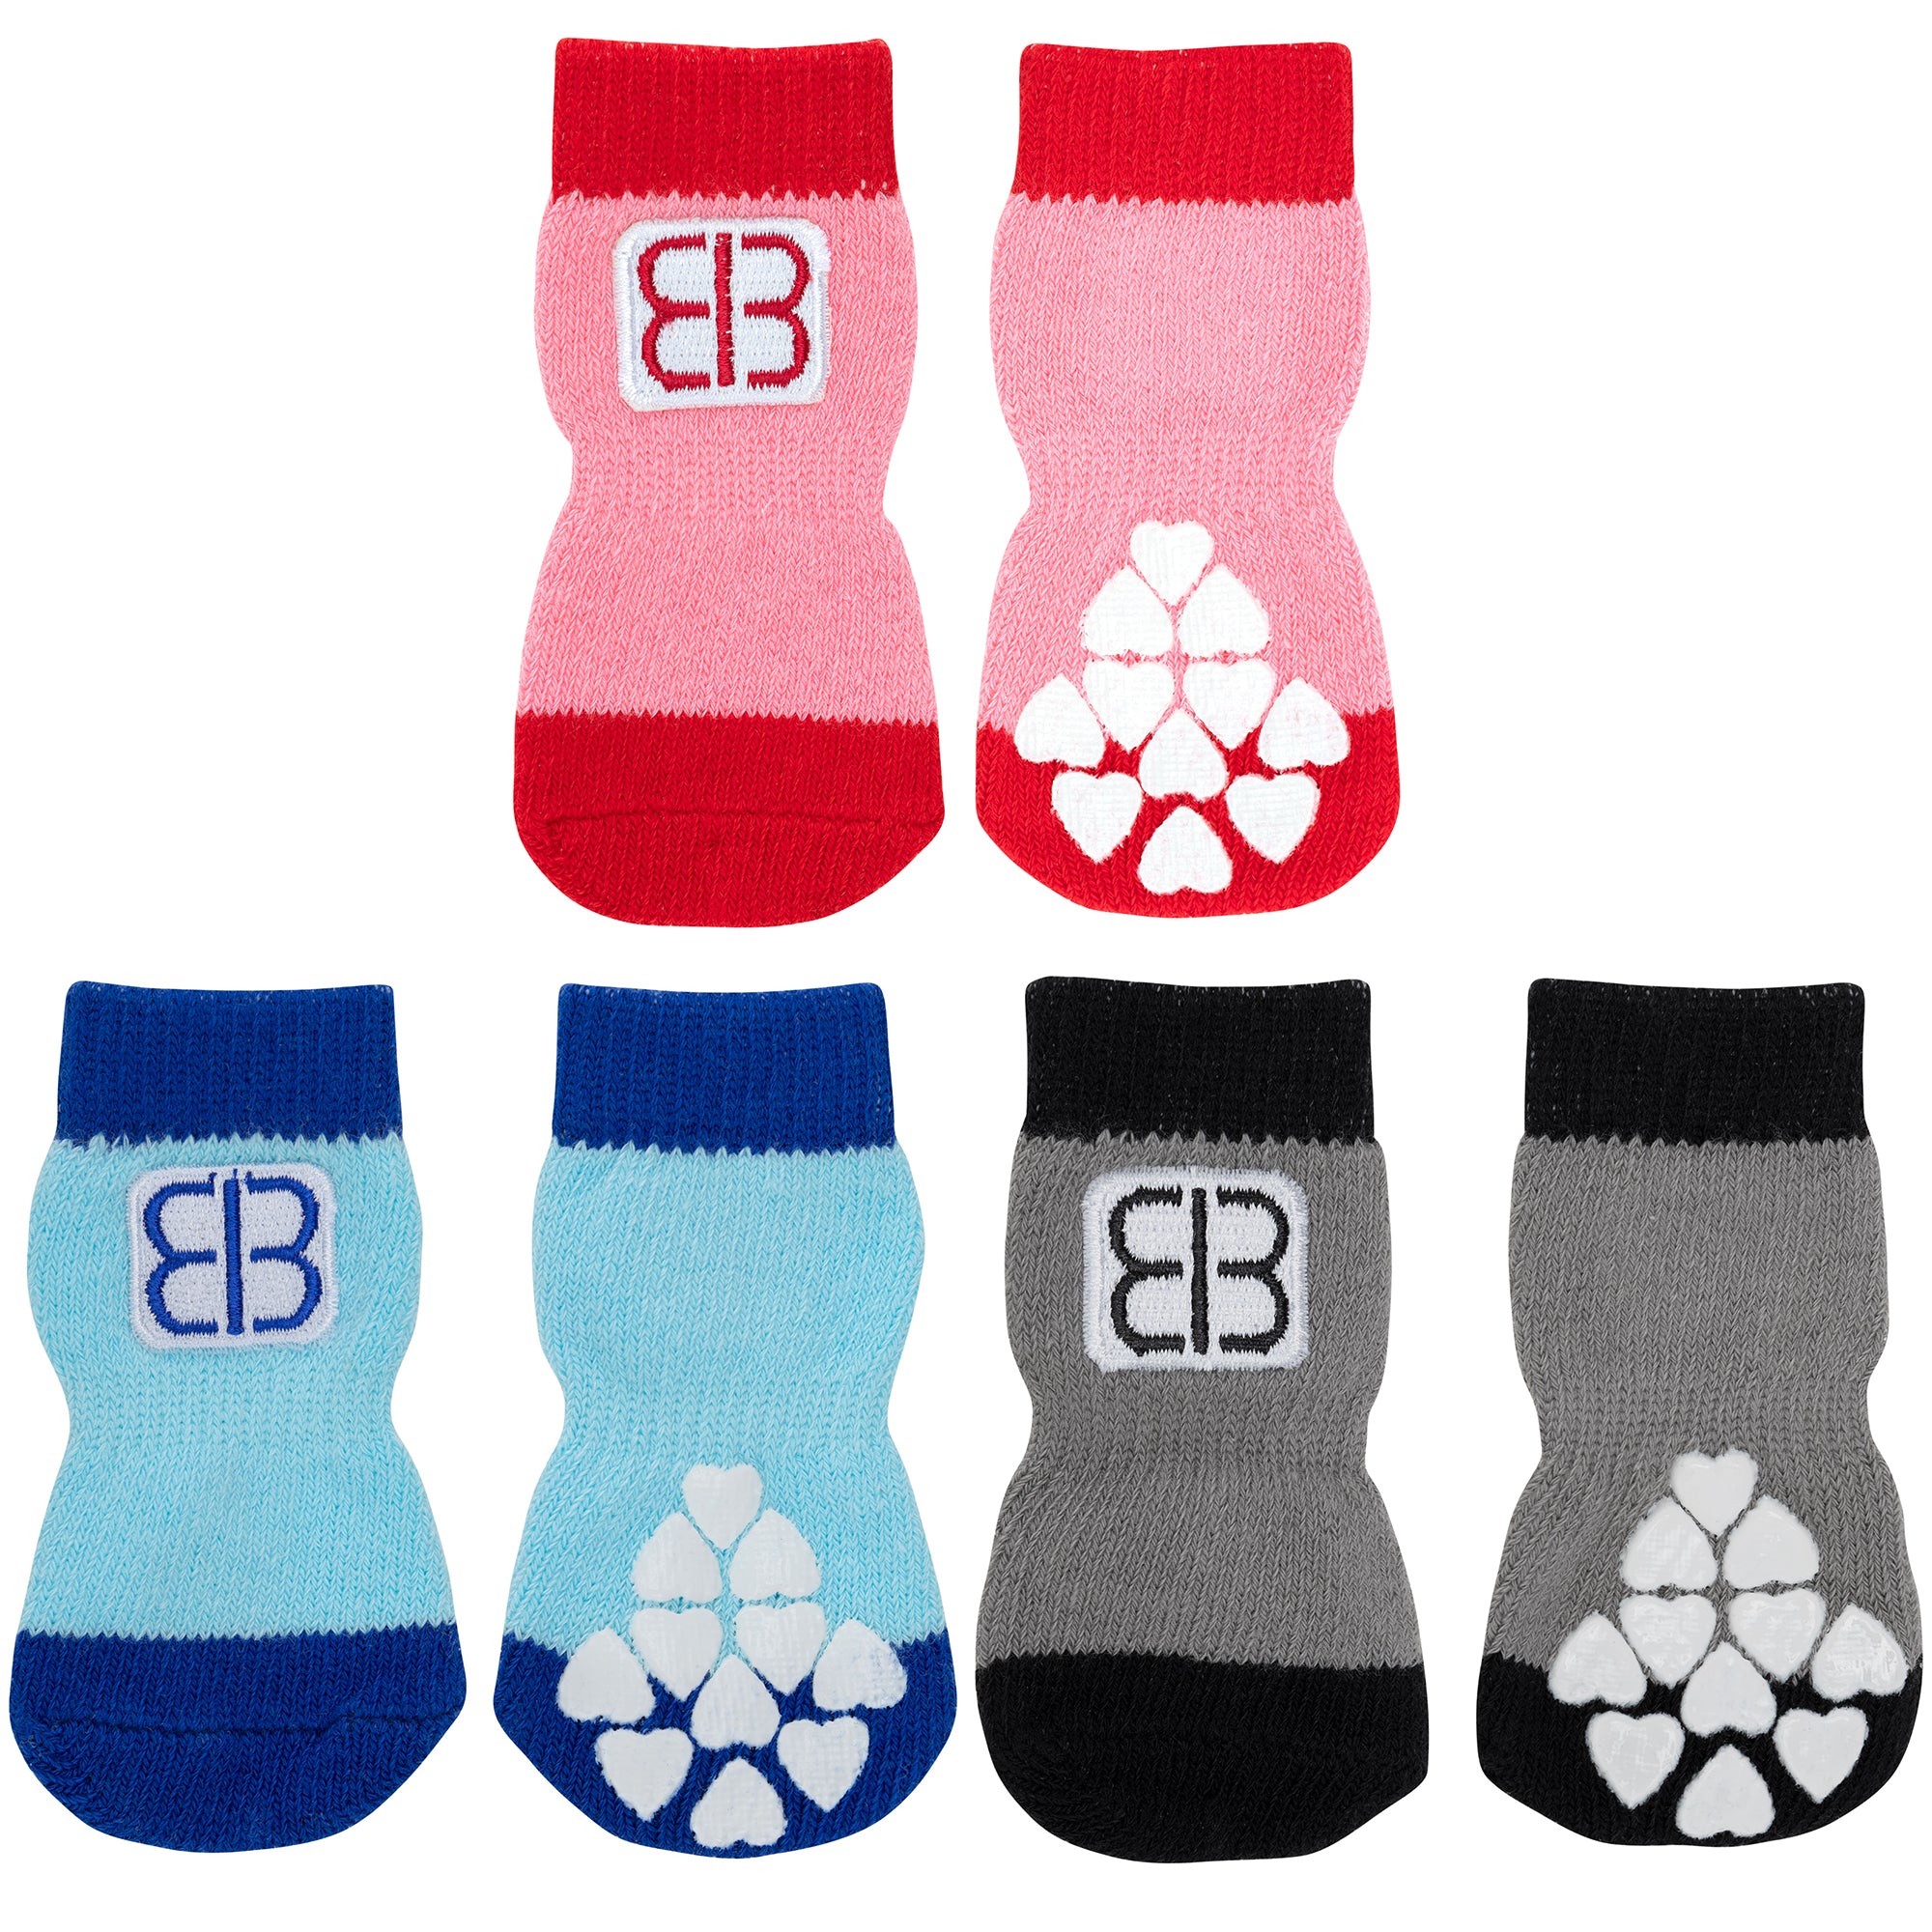 Traction Control Socks For Dogs - Red/Pink - L